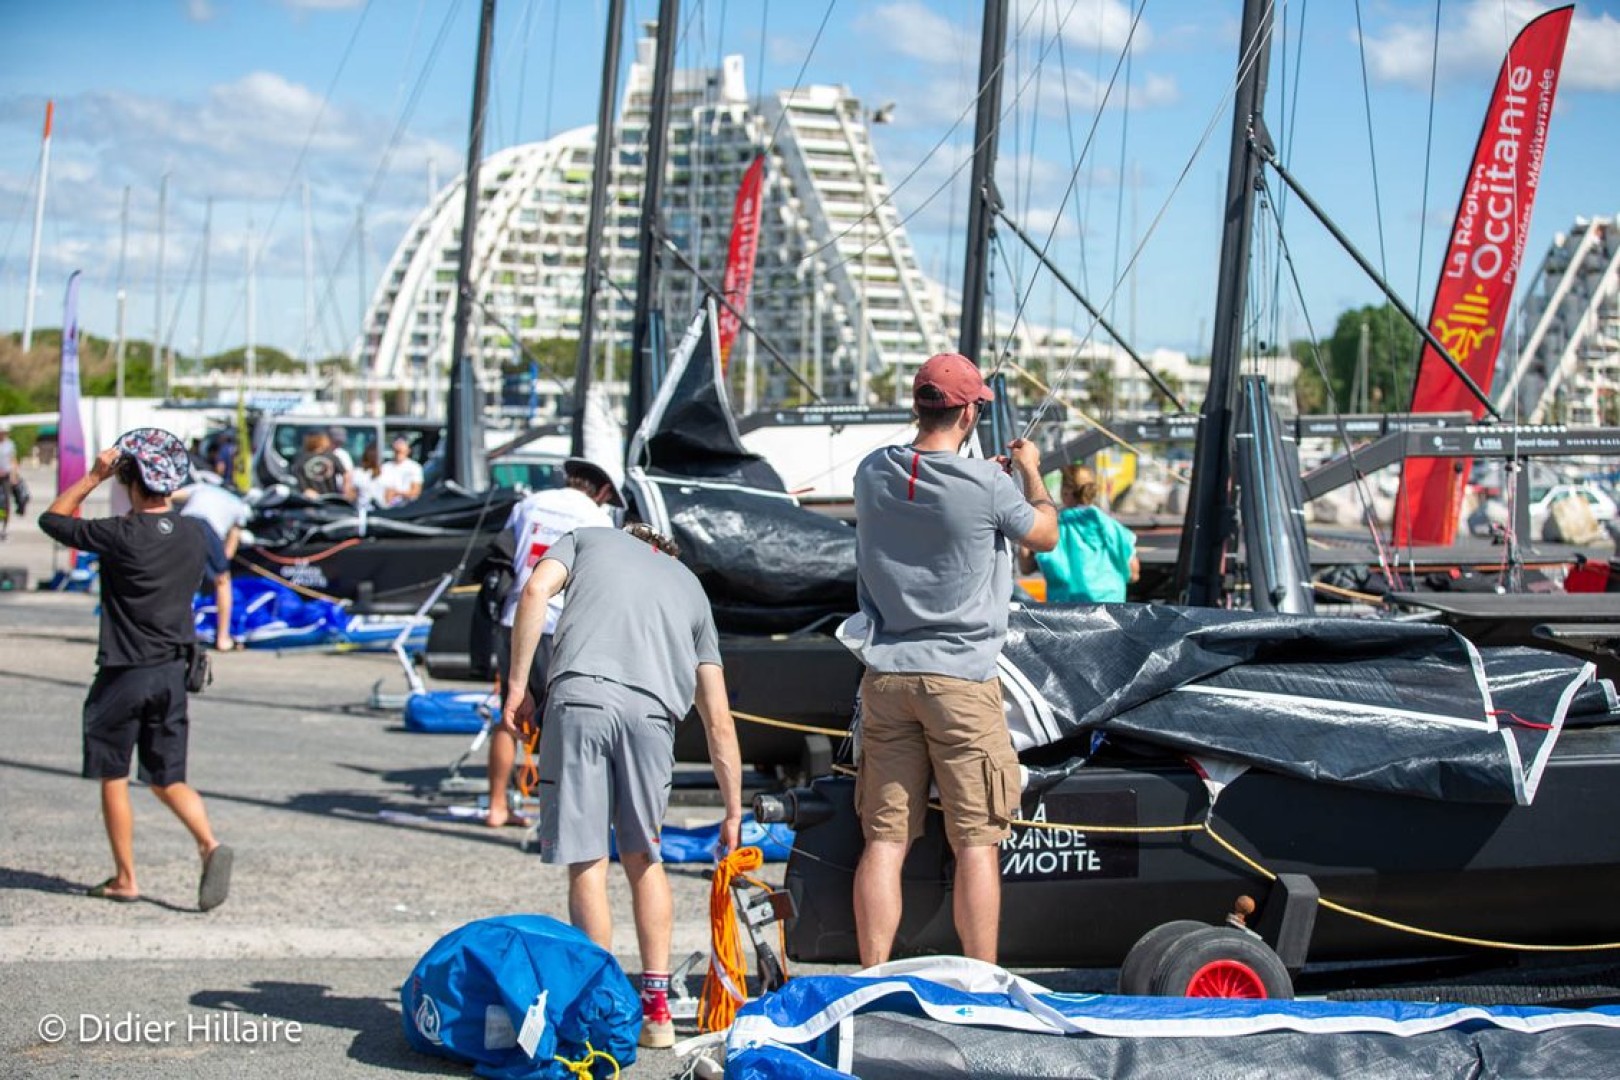 12 Under-25 incredible teams are racing on French waters